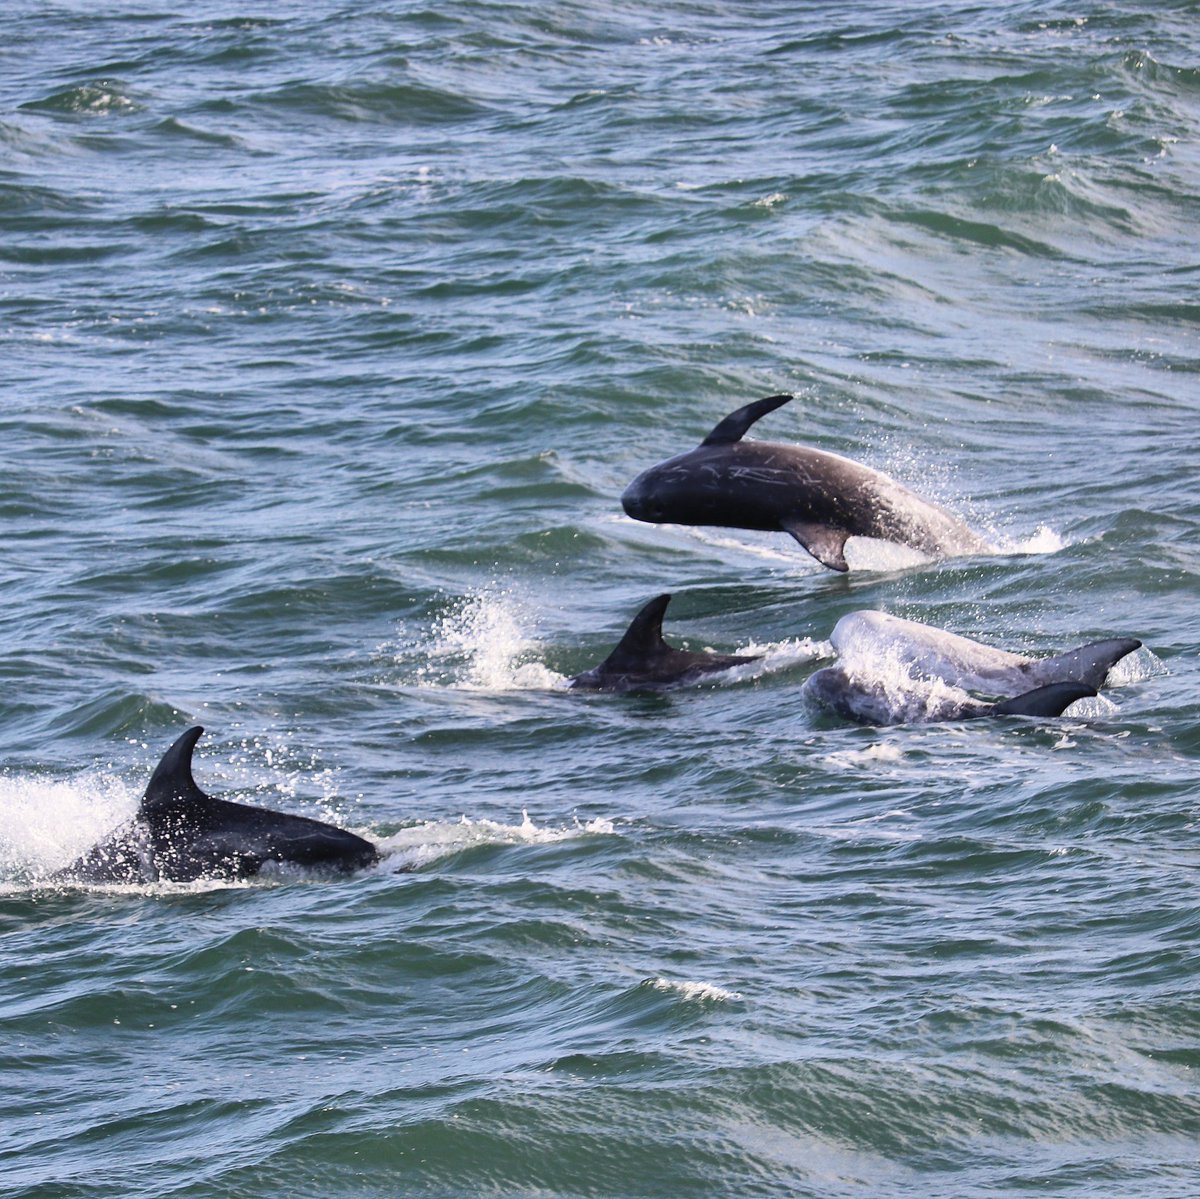 Wonderful morning spent with Risso's #dolphins in #Anglesey 
... as well as curious seals, surfing porpoise and diving gannets! 😍

Being able to see #cetaceans and #marinewildlife right from the beautiful Welsh coast is such a treat 🌟